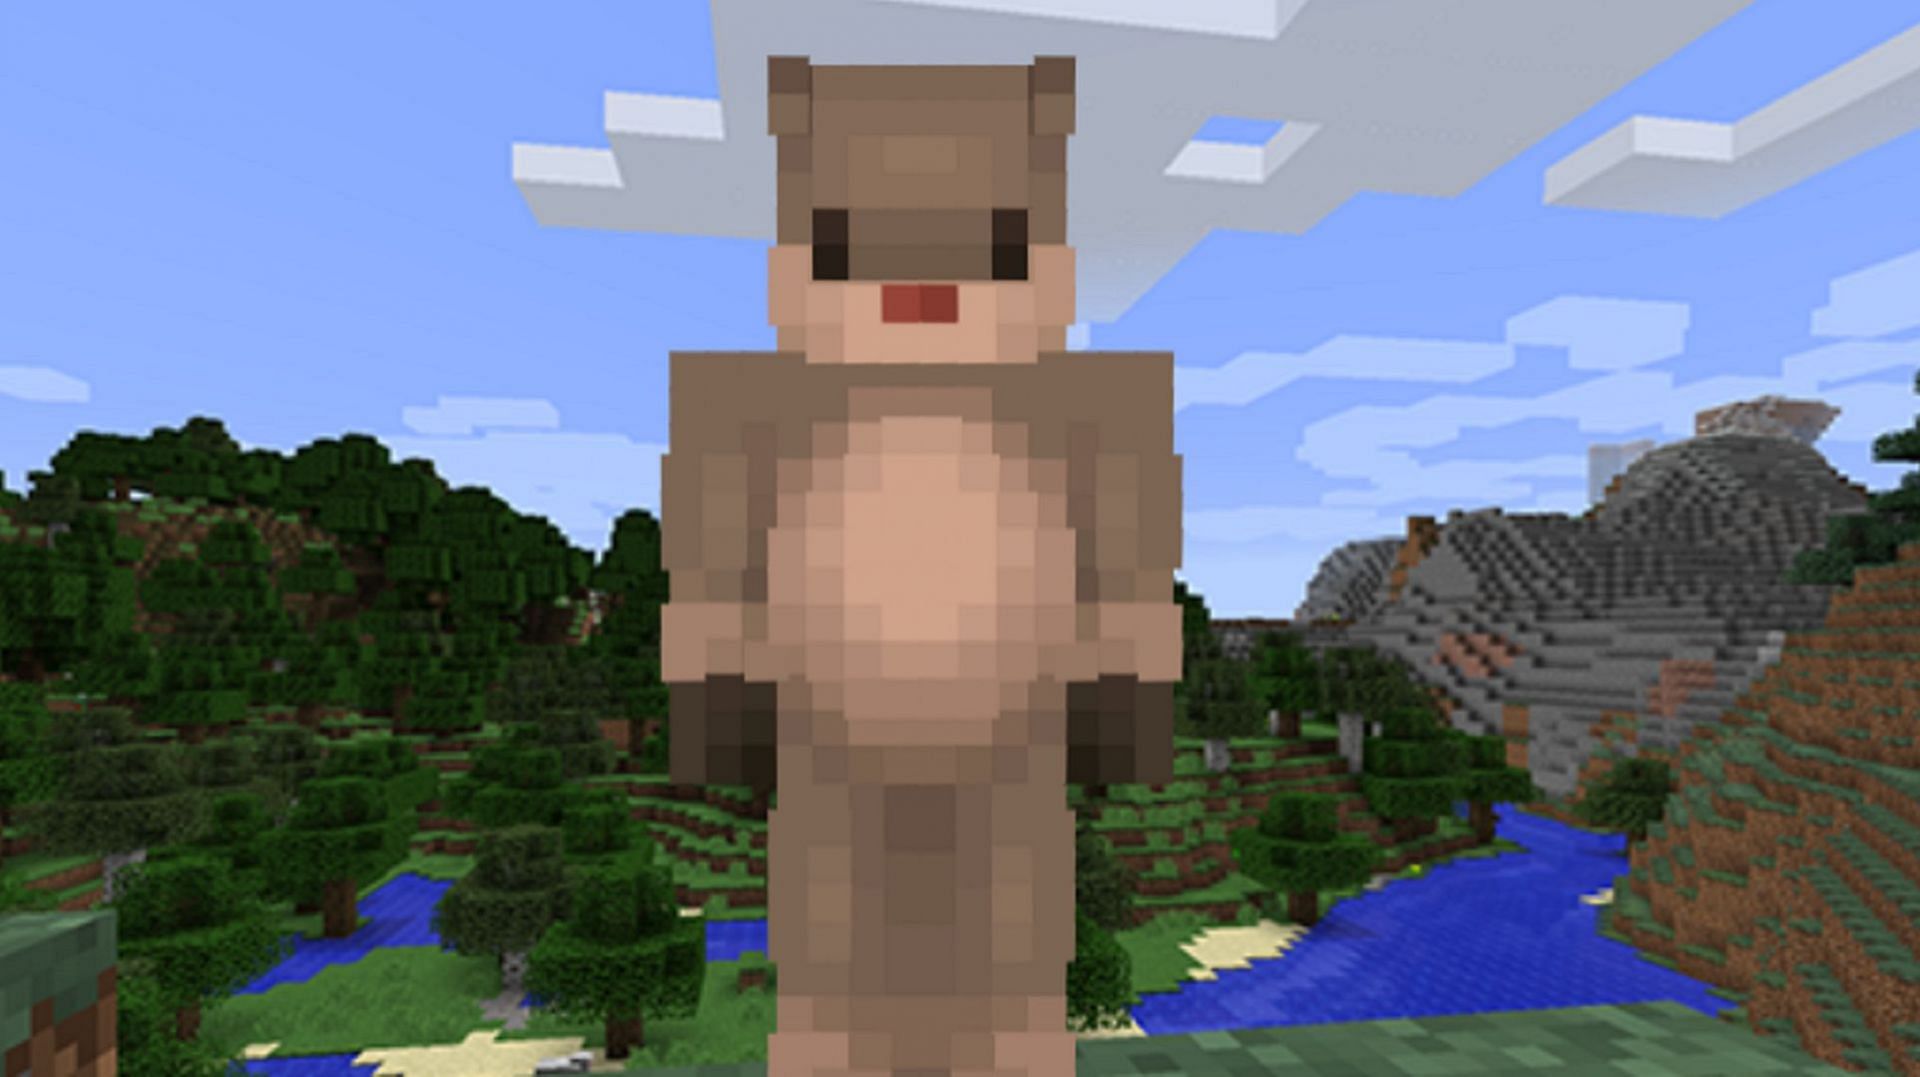 It may be missing antlers, but this Rudolph skin for Minecraft is still quite adorable. (Image via Theanswerisno/The Skindex)